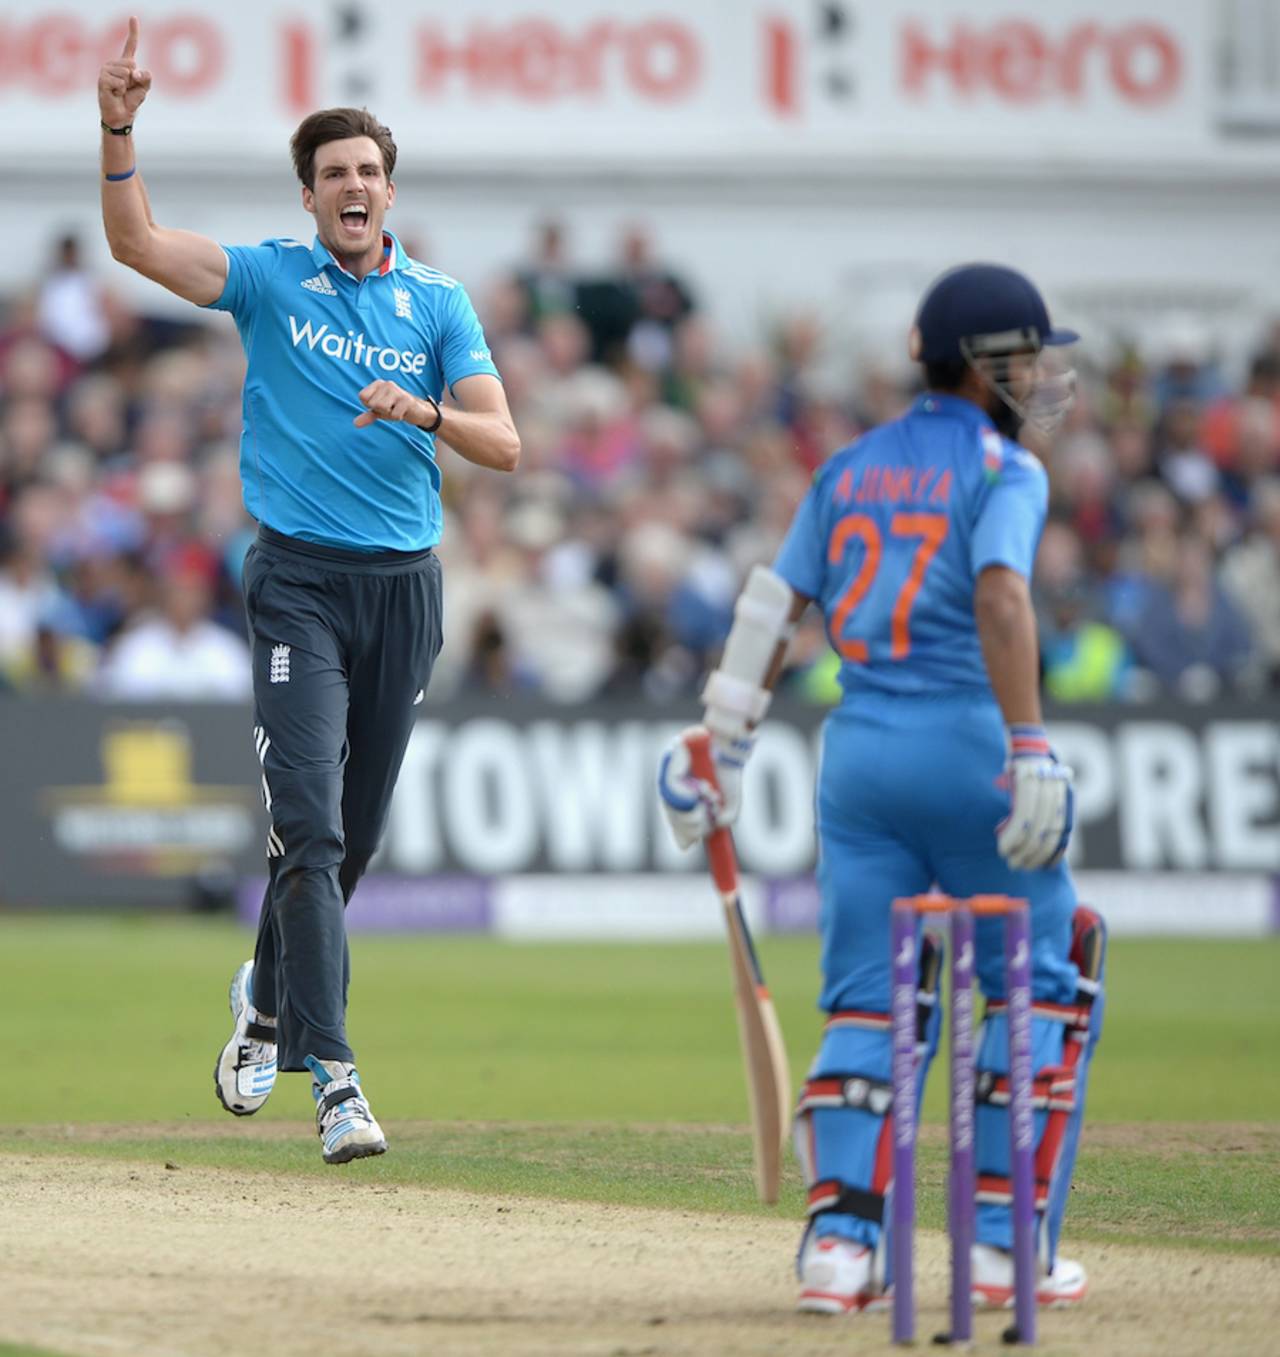 Steven Finn returned to England duty in the ODI series against India after a year out of the side&nbsp;&nbsp;&bull;&nbsp;&nbsp;Getty Images